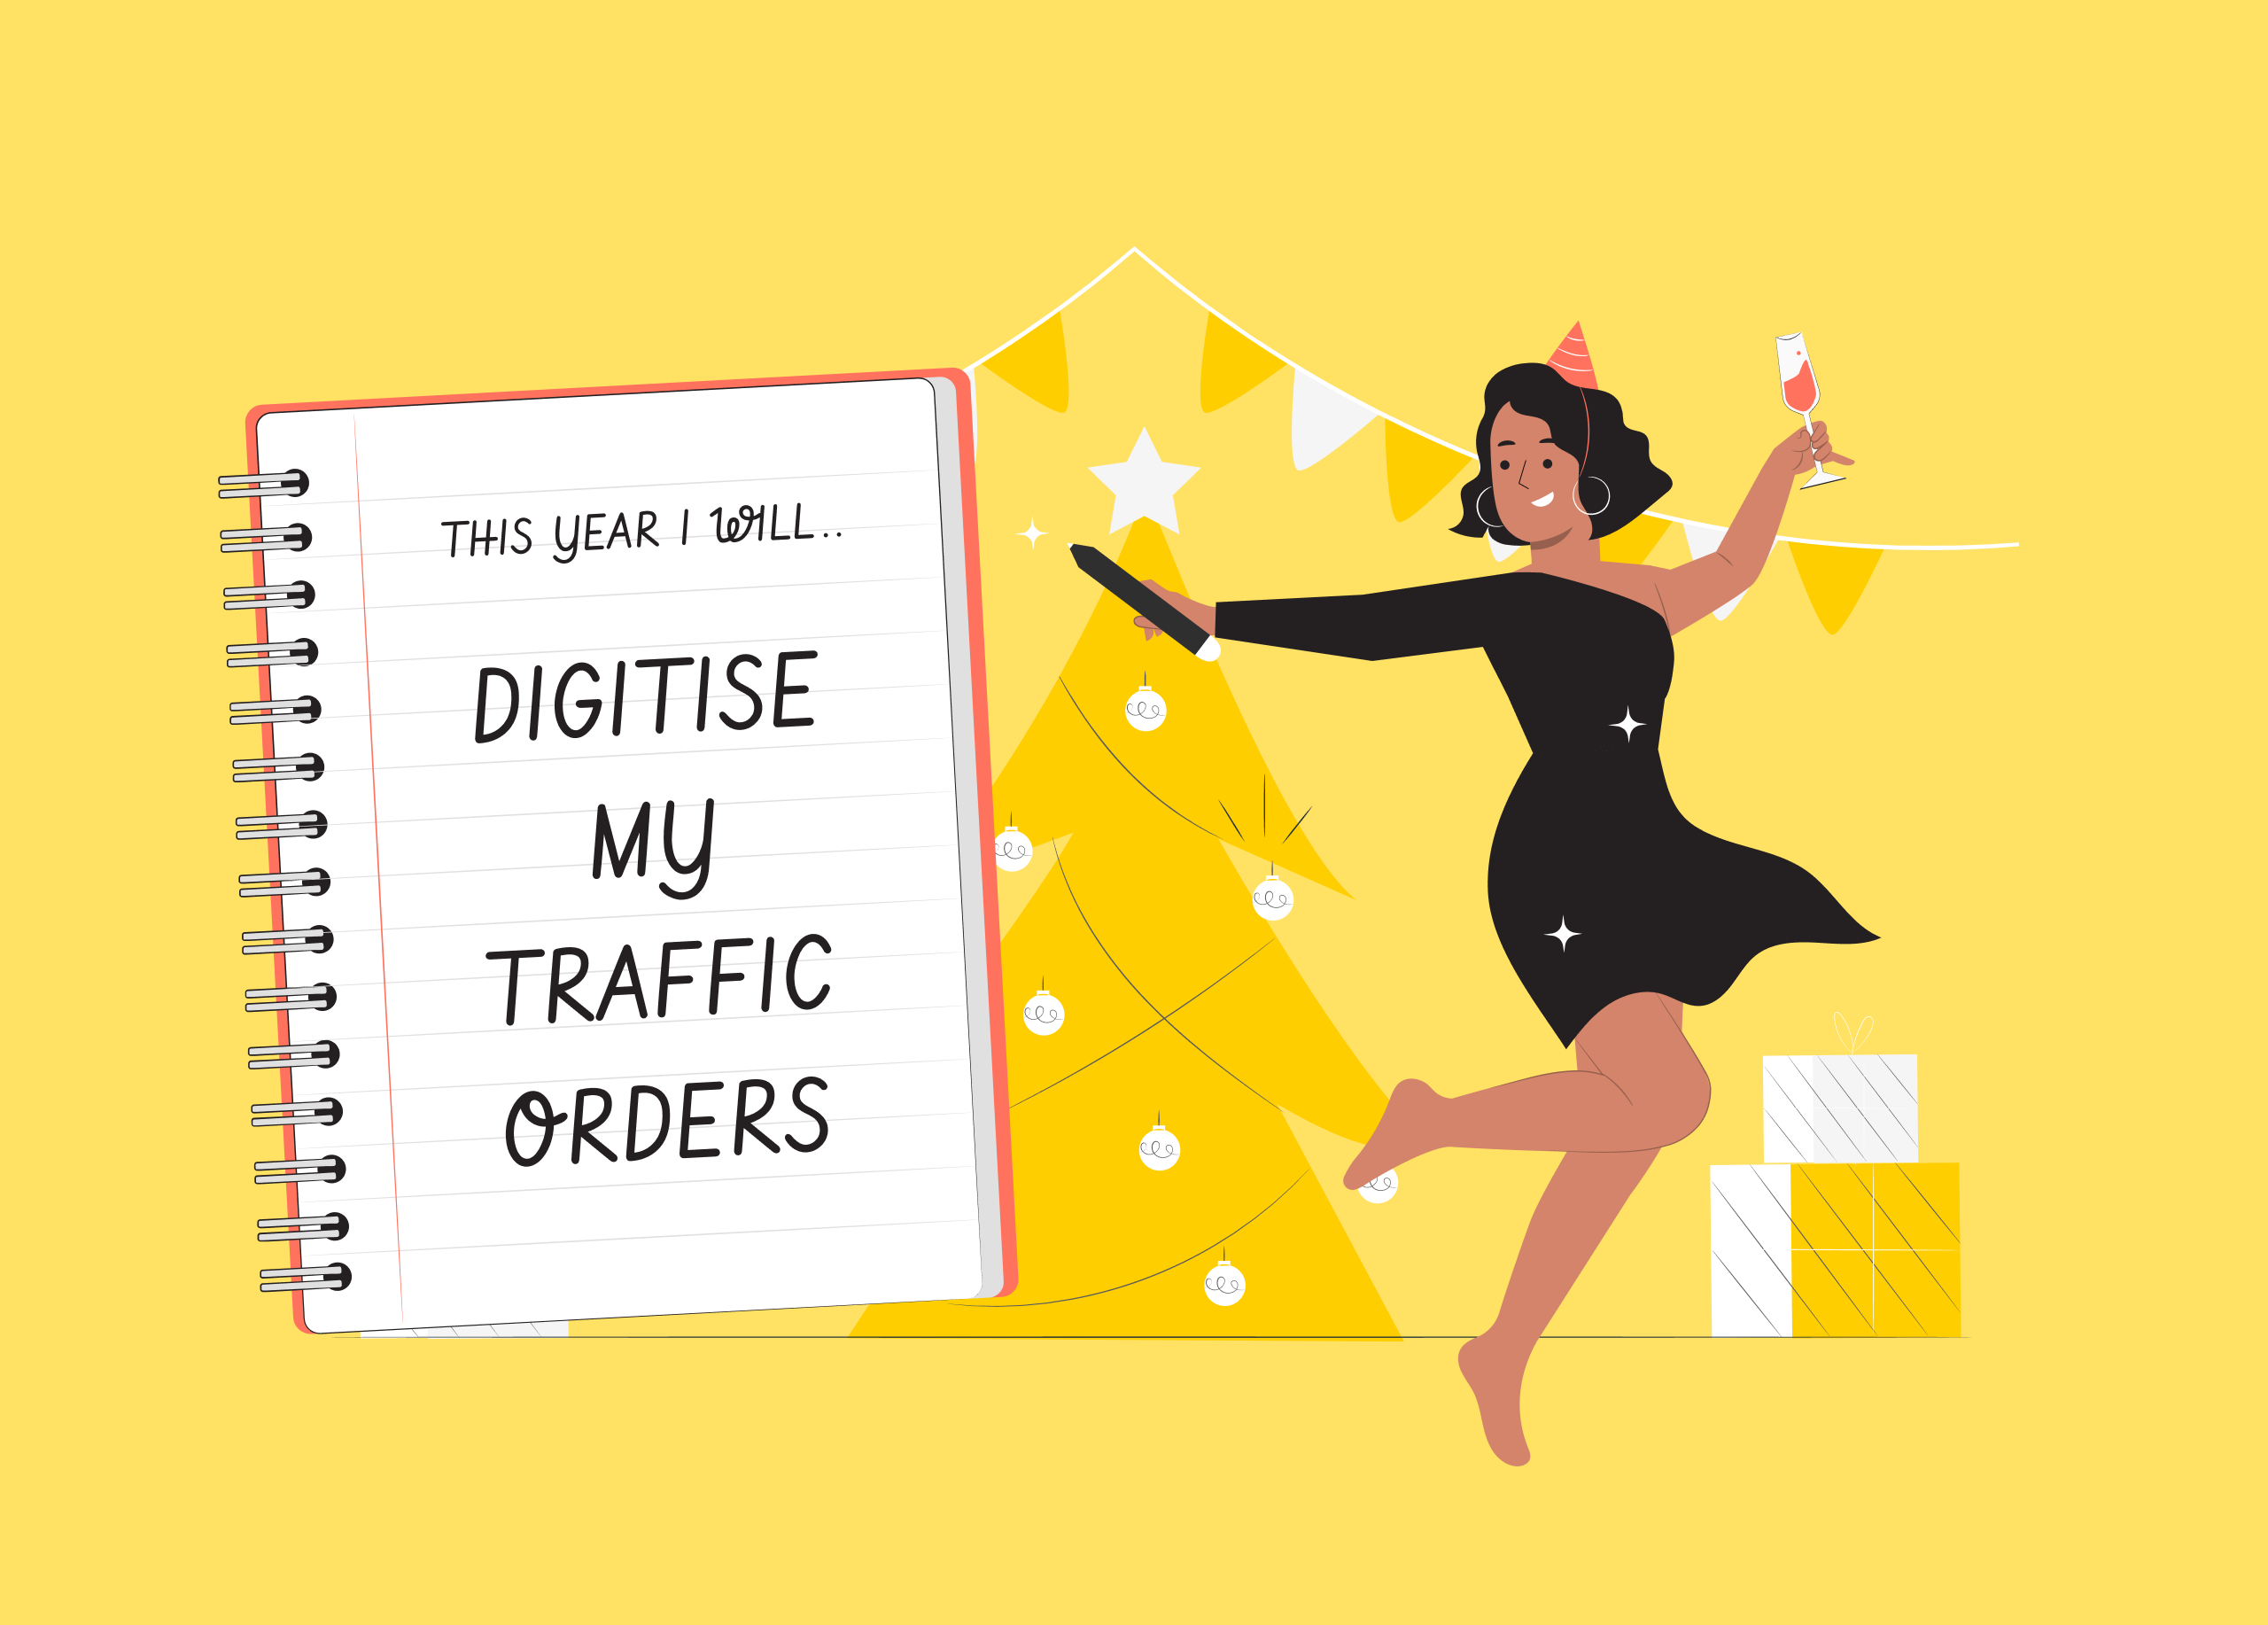 A new year, a better way to manage traffic orders